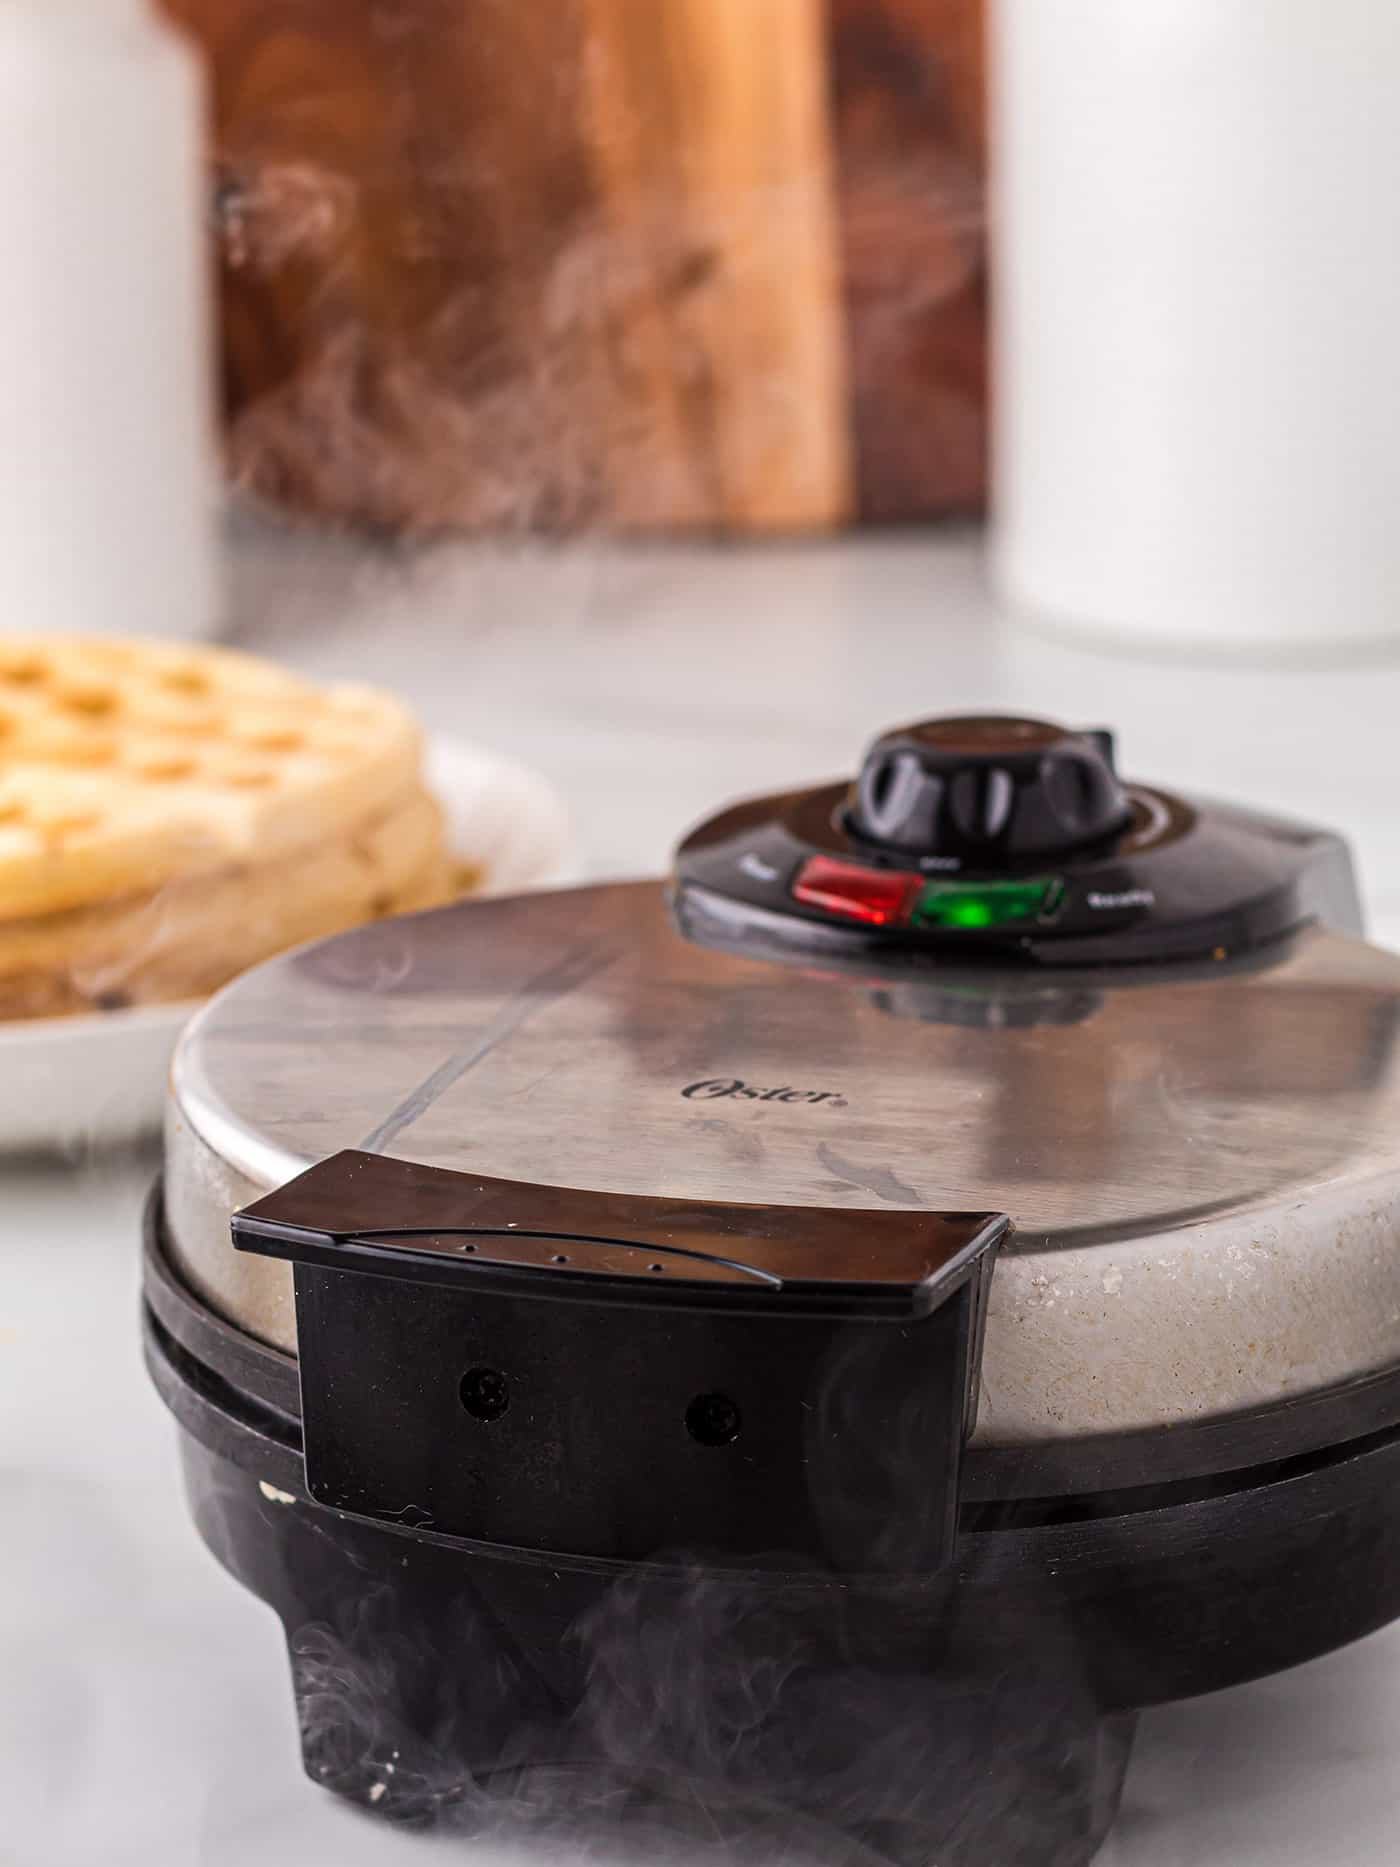 A waffle maker with steam coming out